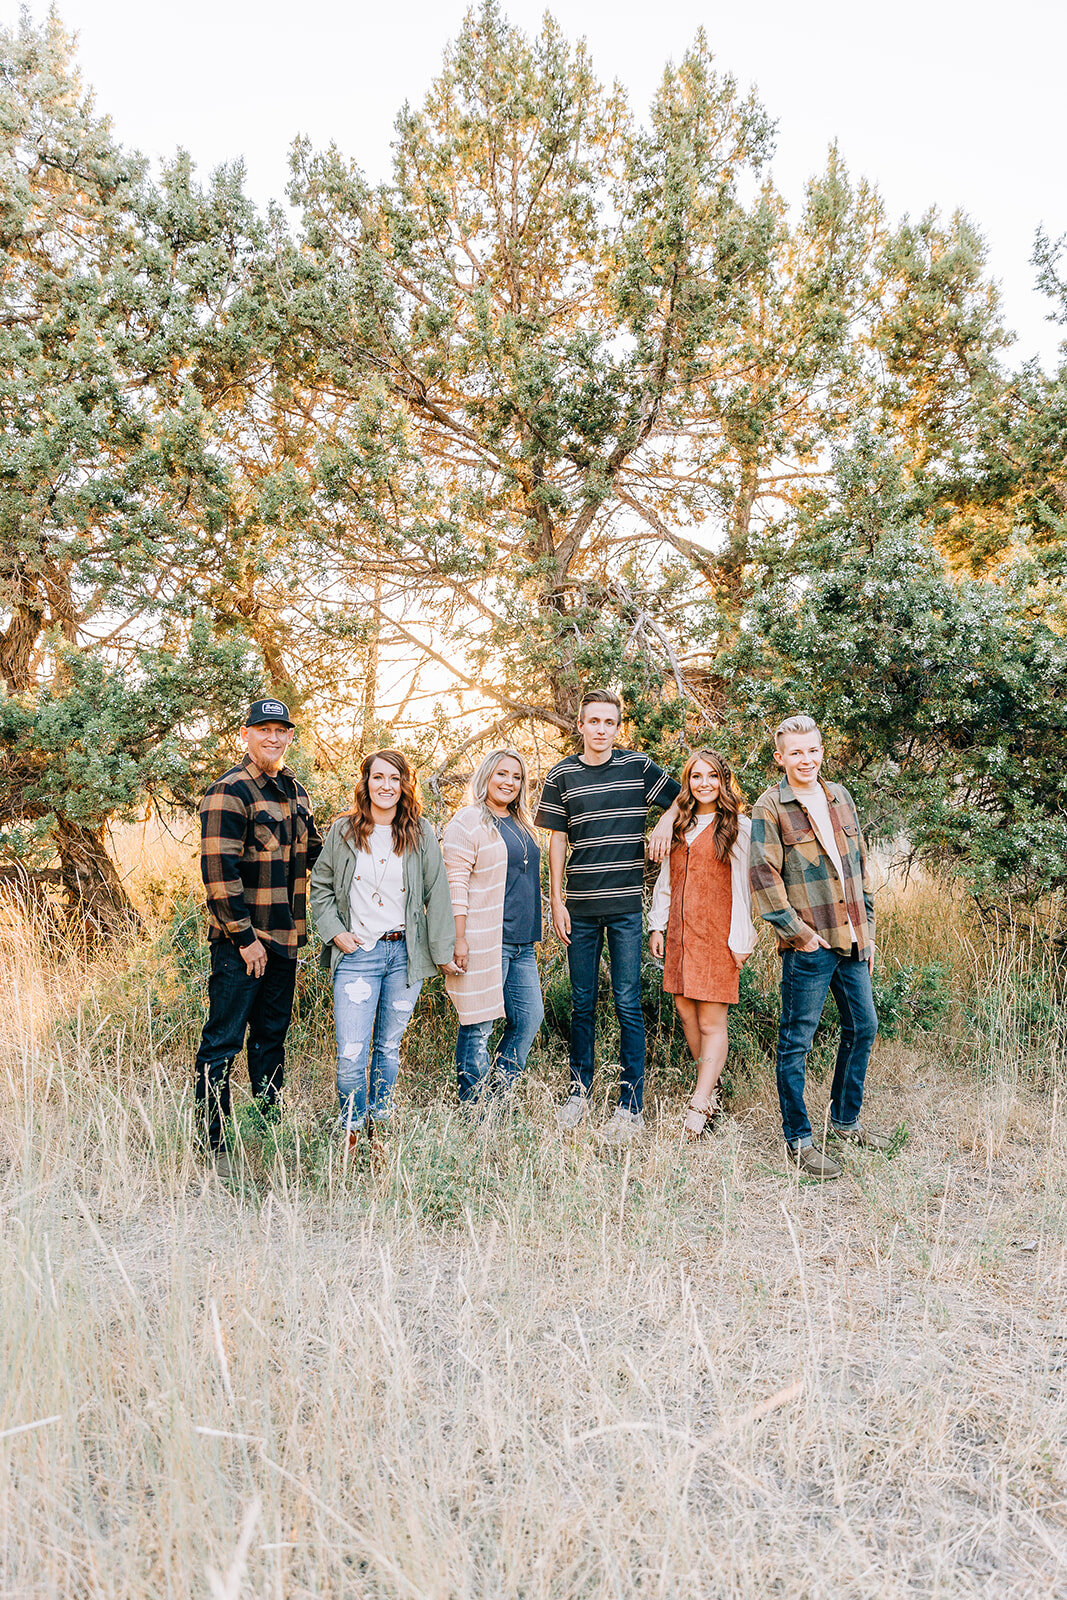  group shot at fashion shoot for the classic shop classic styles and easy-to-pair neutral pieces for men and women located in tremonton utah and online clothing boutique commercial photo shoot by bella alder photography commercial work fashion portra